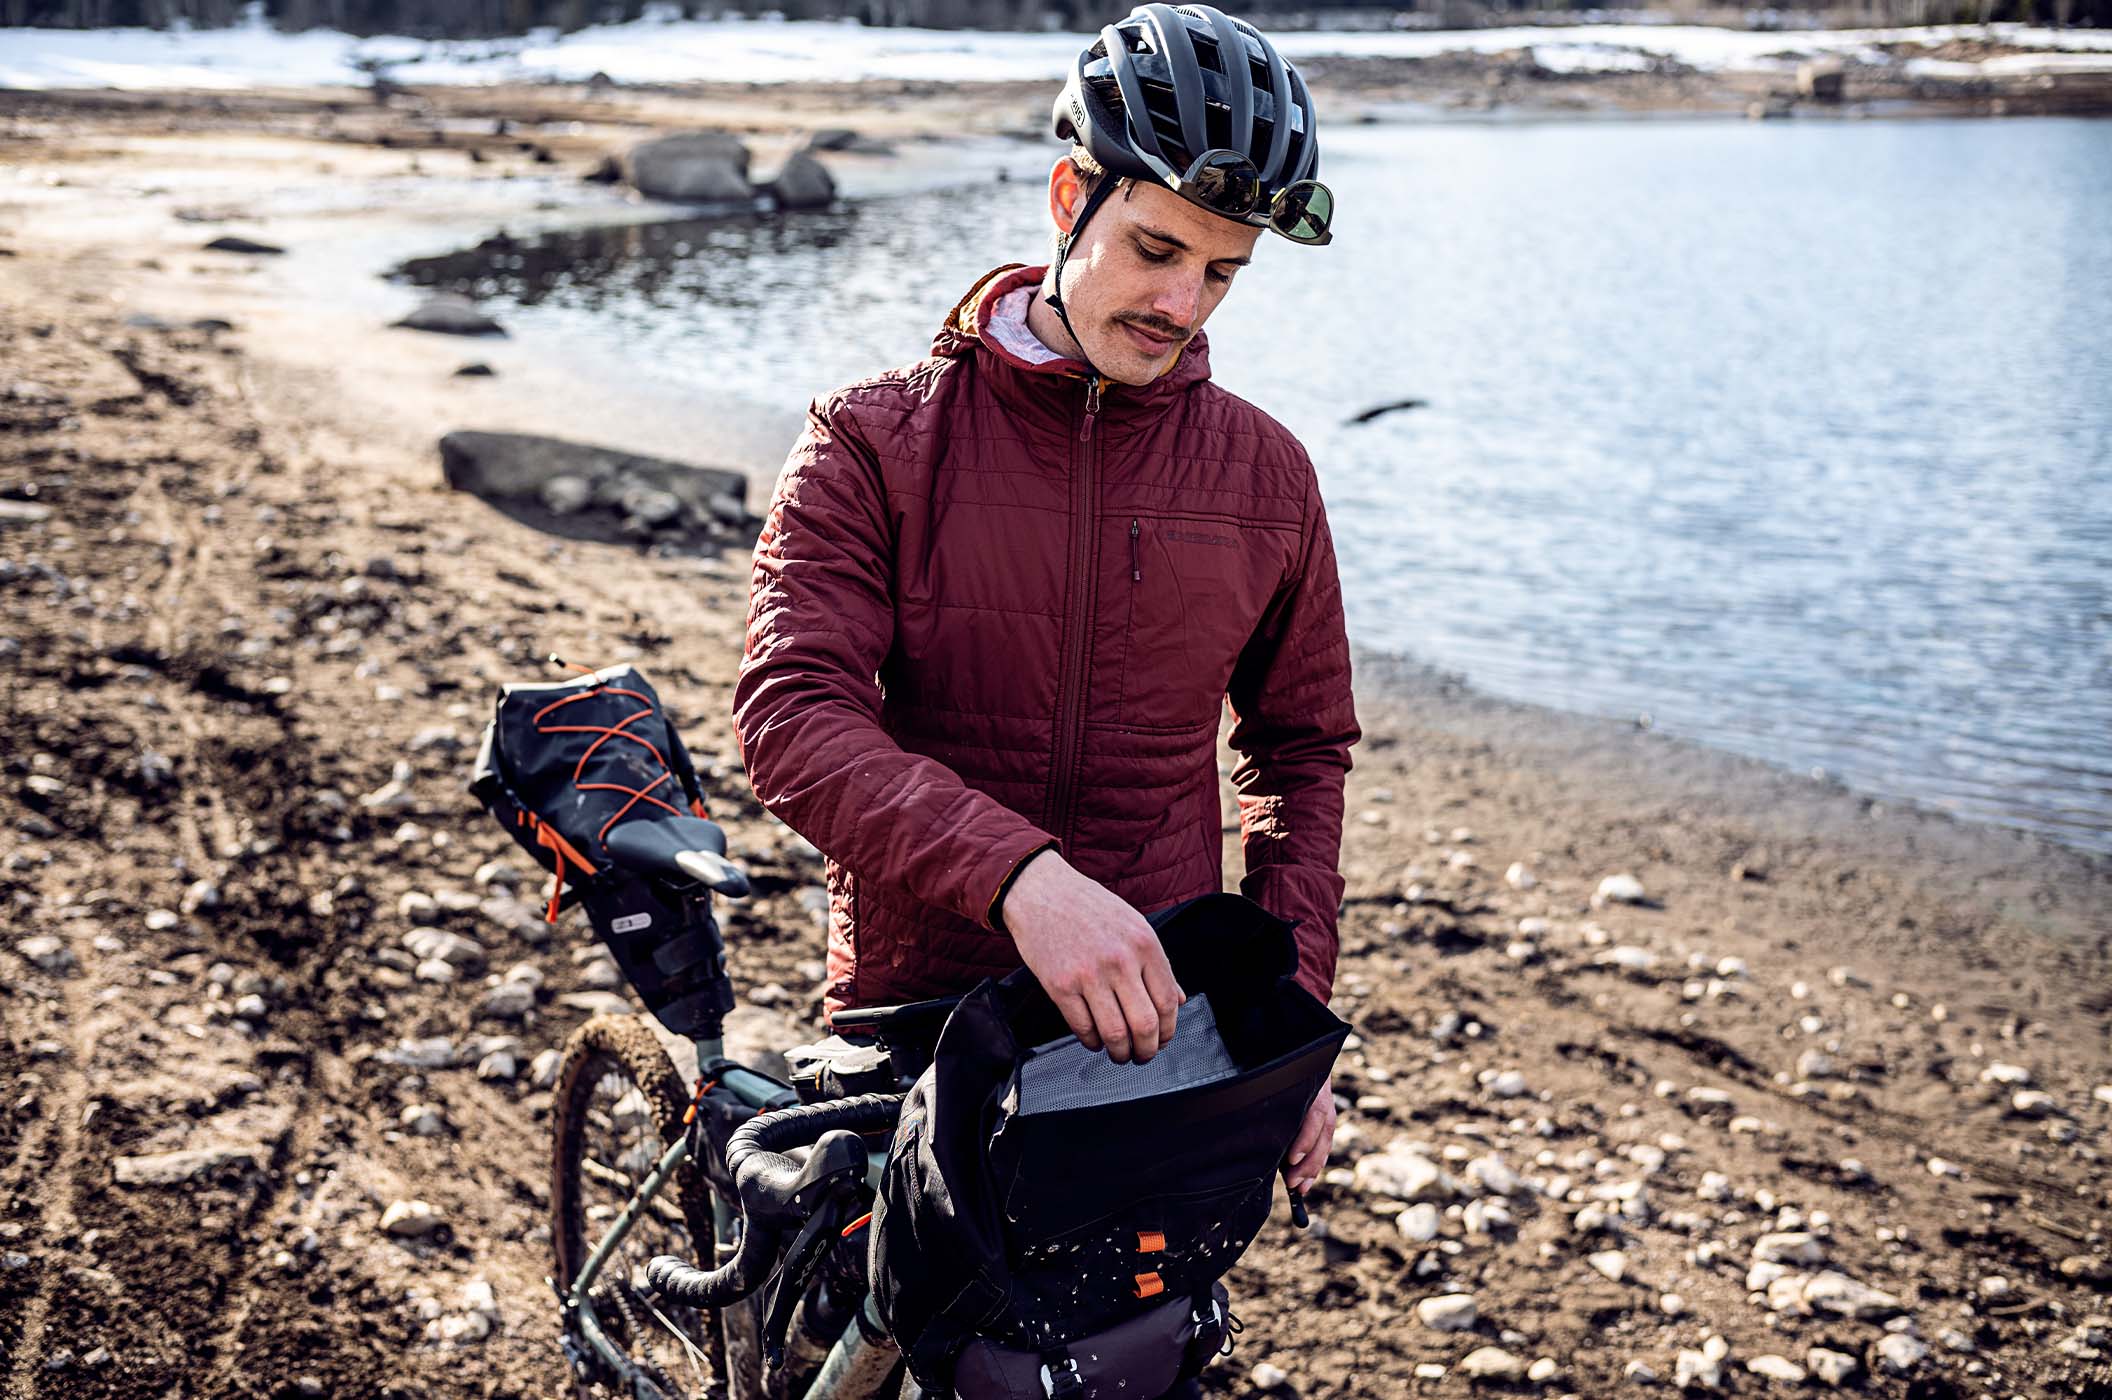 ORTLIEB Today – The World's Leading Manufacturer of Waterproof Bicycle and Outdoor Bags